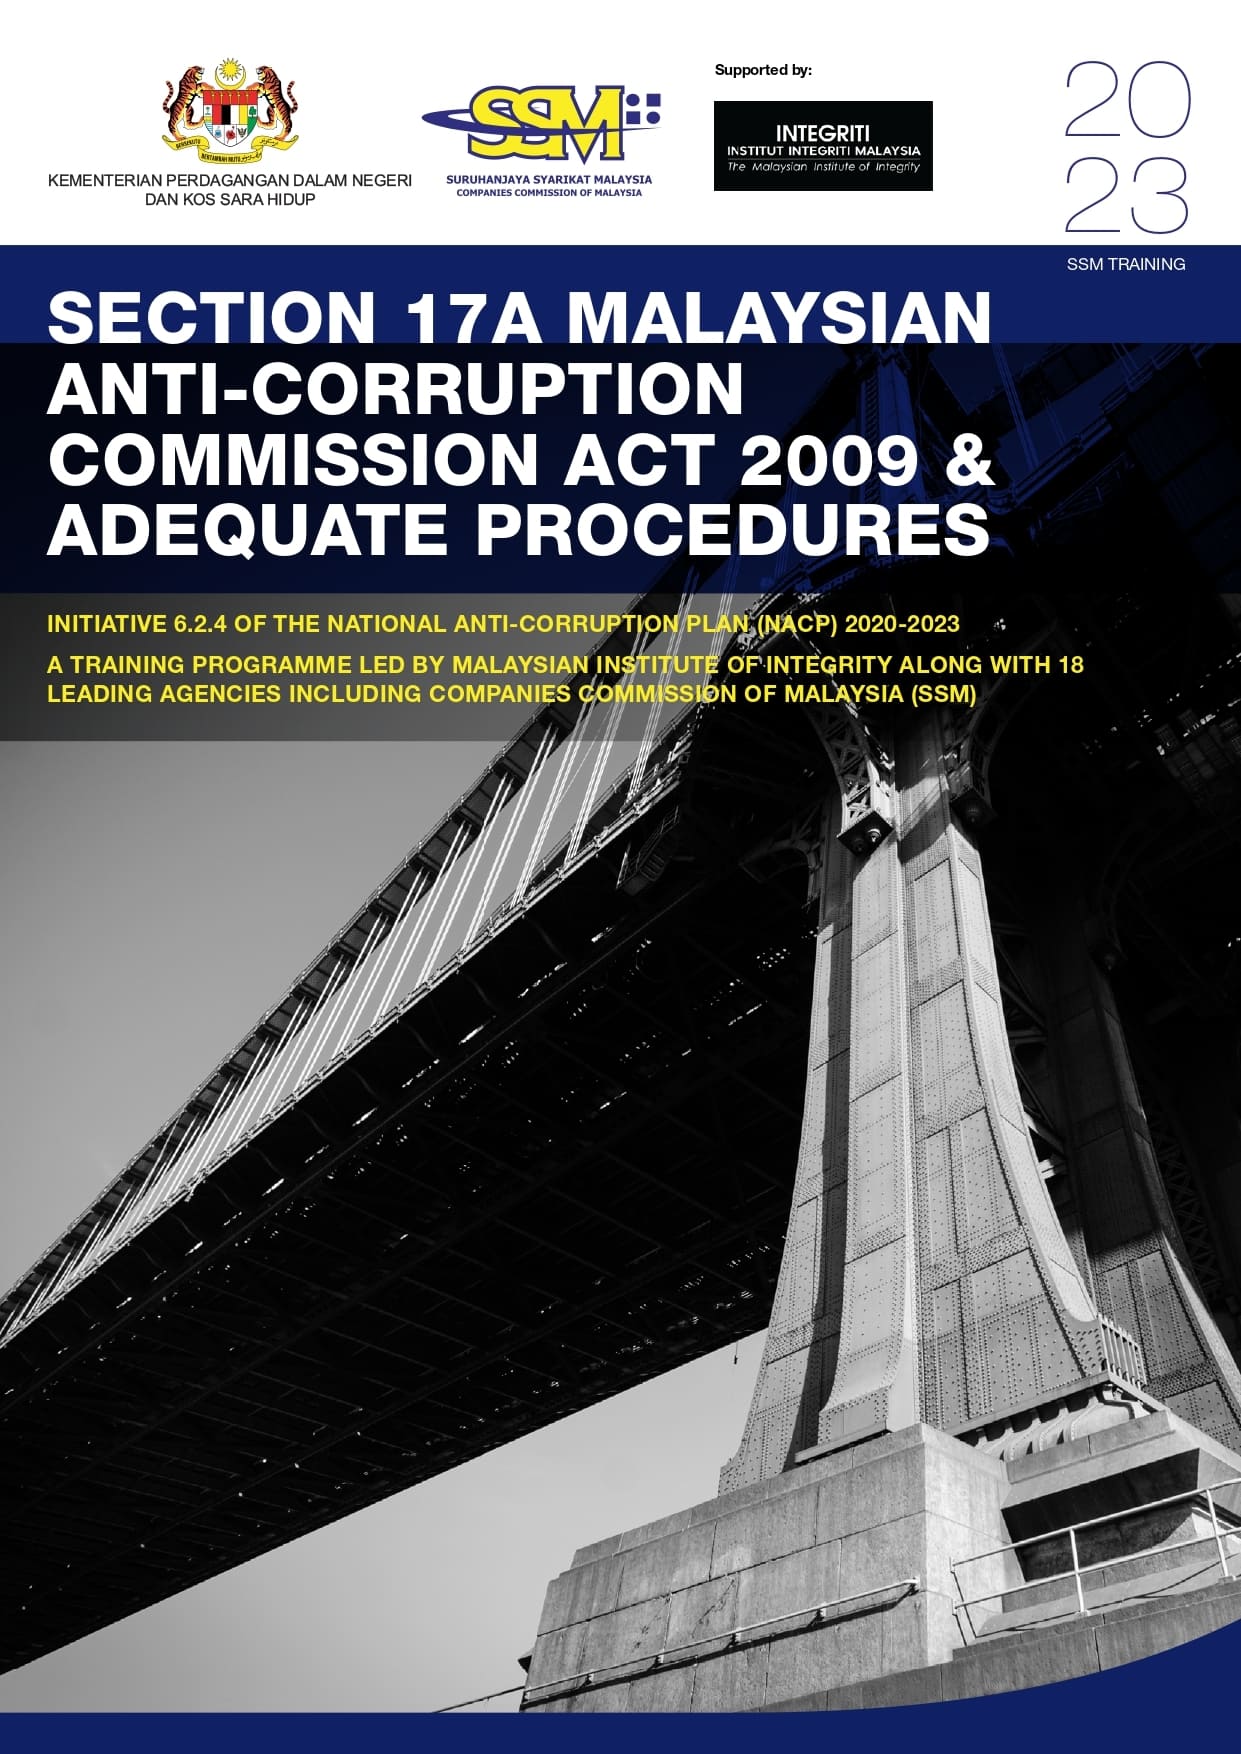 SECTION 17A MALAYSIAN ANTI-CORRUPTION COMMISSION ACT 2009 _ ADEQUATE PROCEDURES.jpg